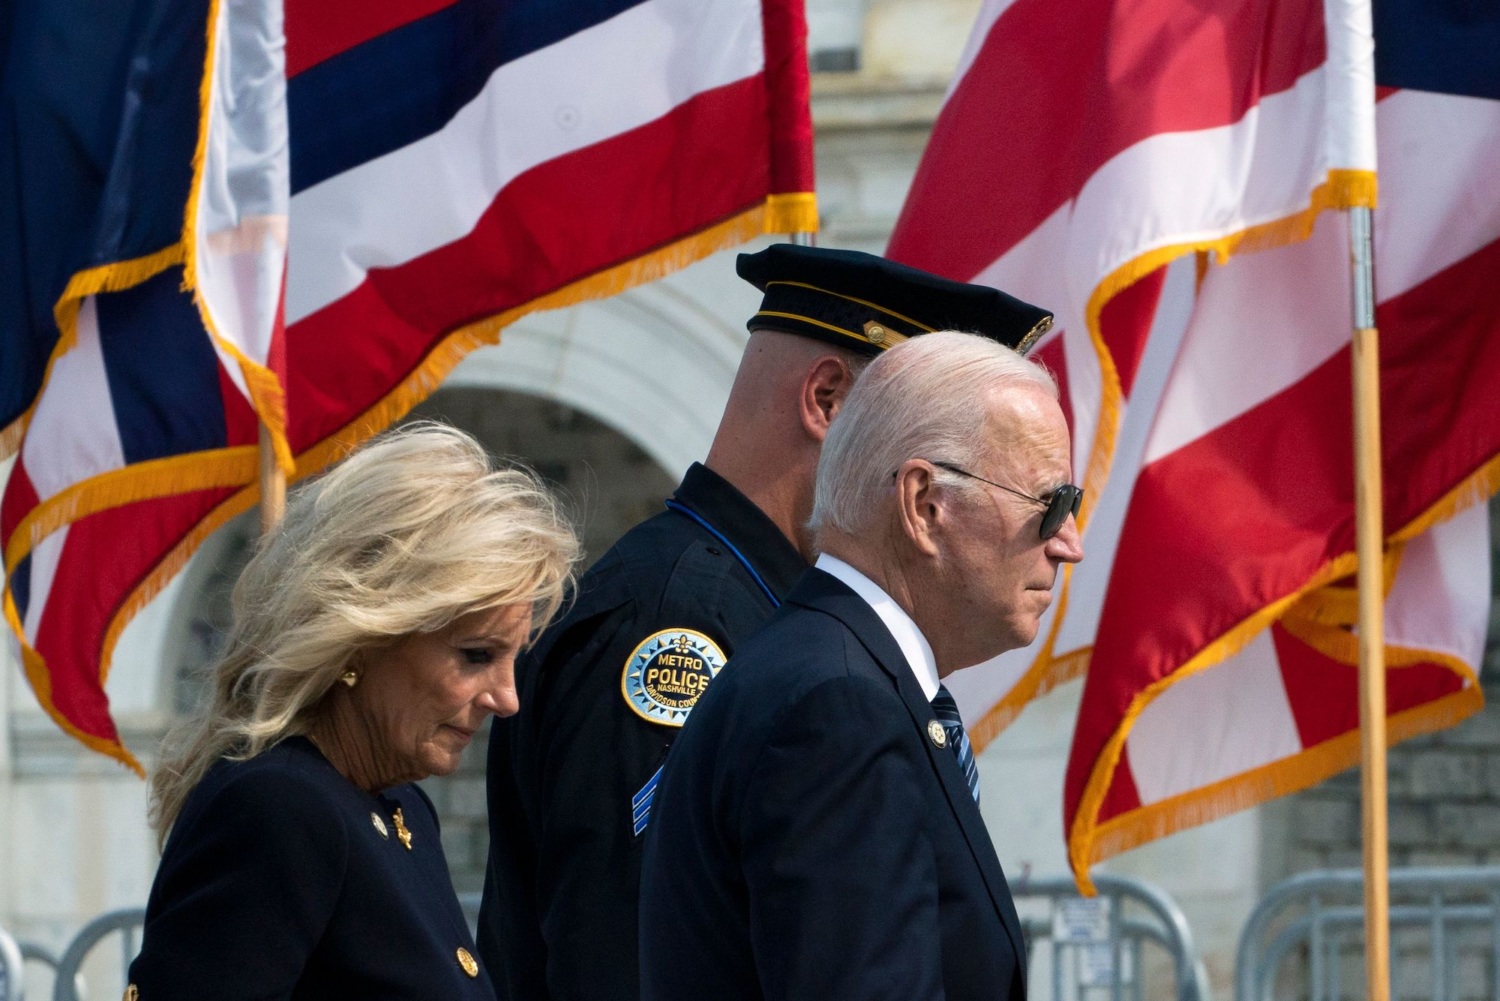 President Biden to Congress: If You Support Police, Ban Assault Weapons